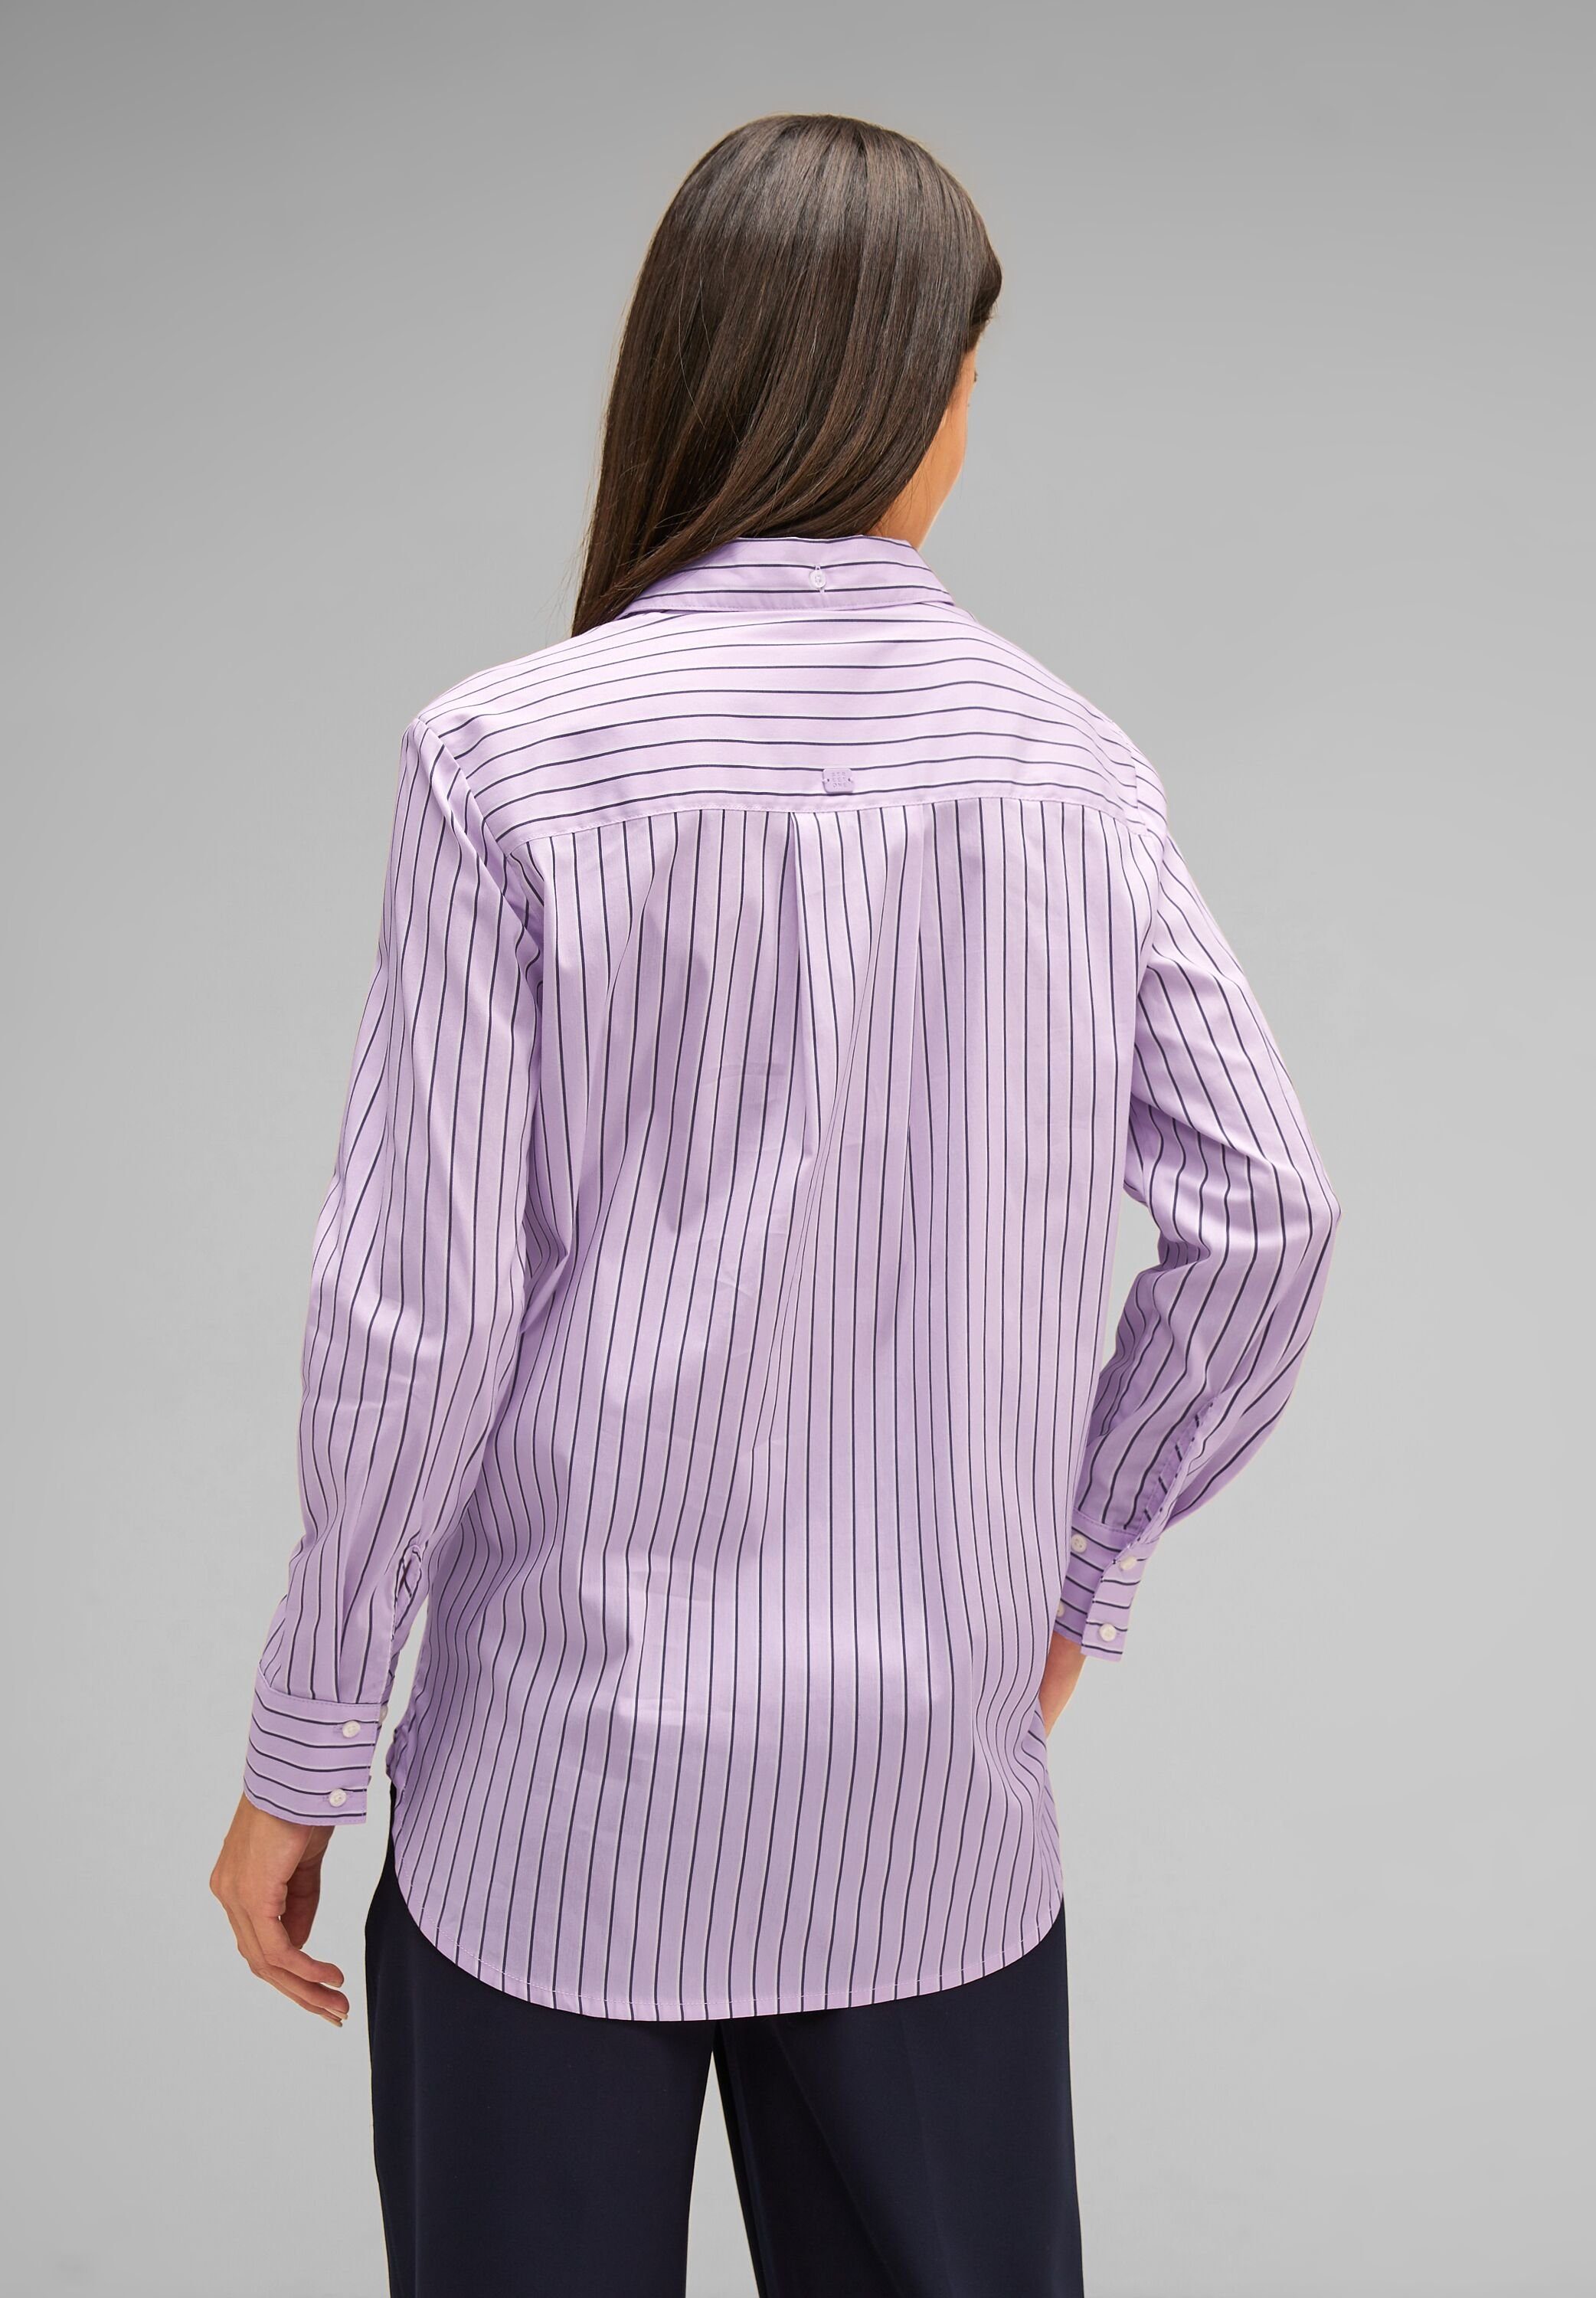 STREET ONE Longbluse Office Streifenbluse office QR Streifenmuster LTD soft blouse Striped lilac pure